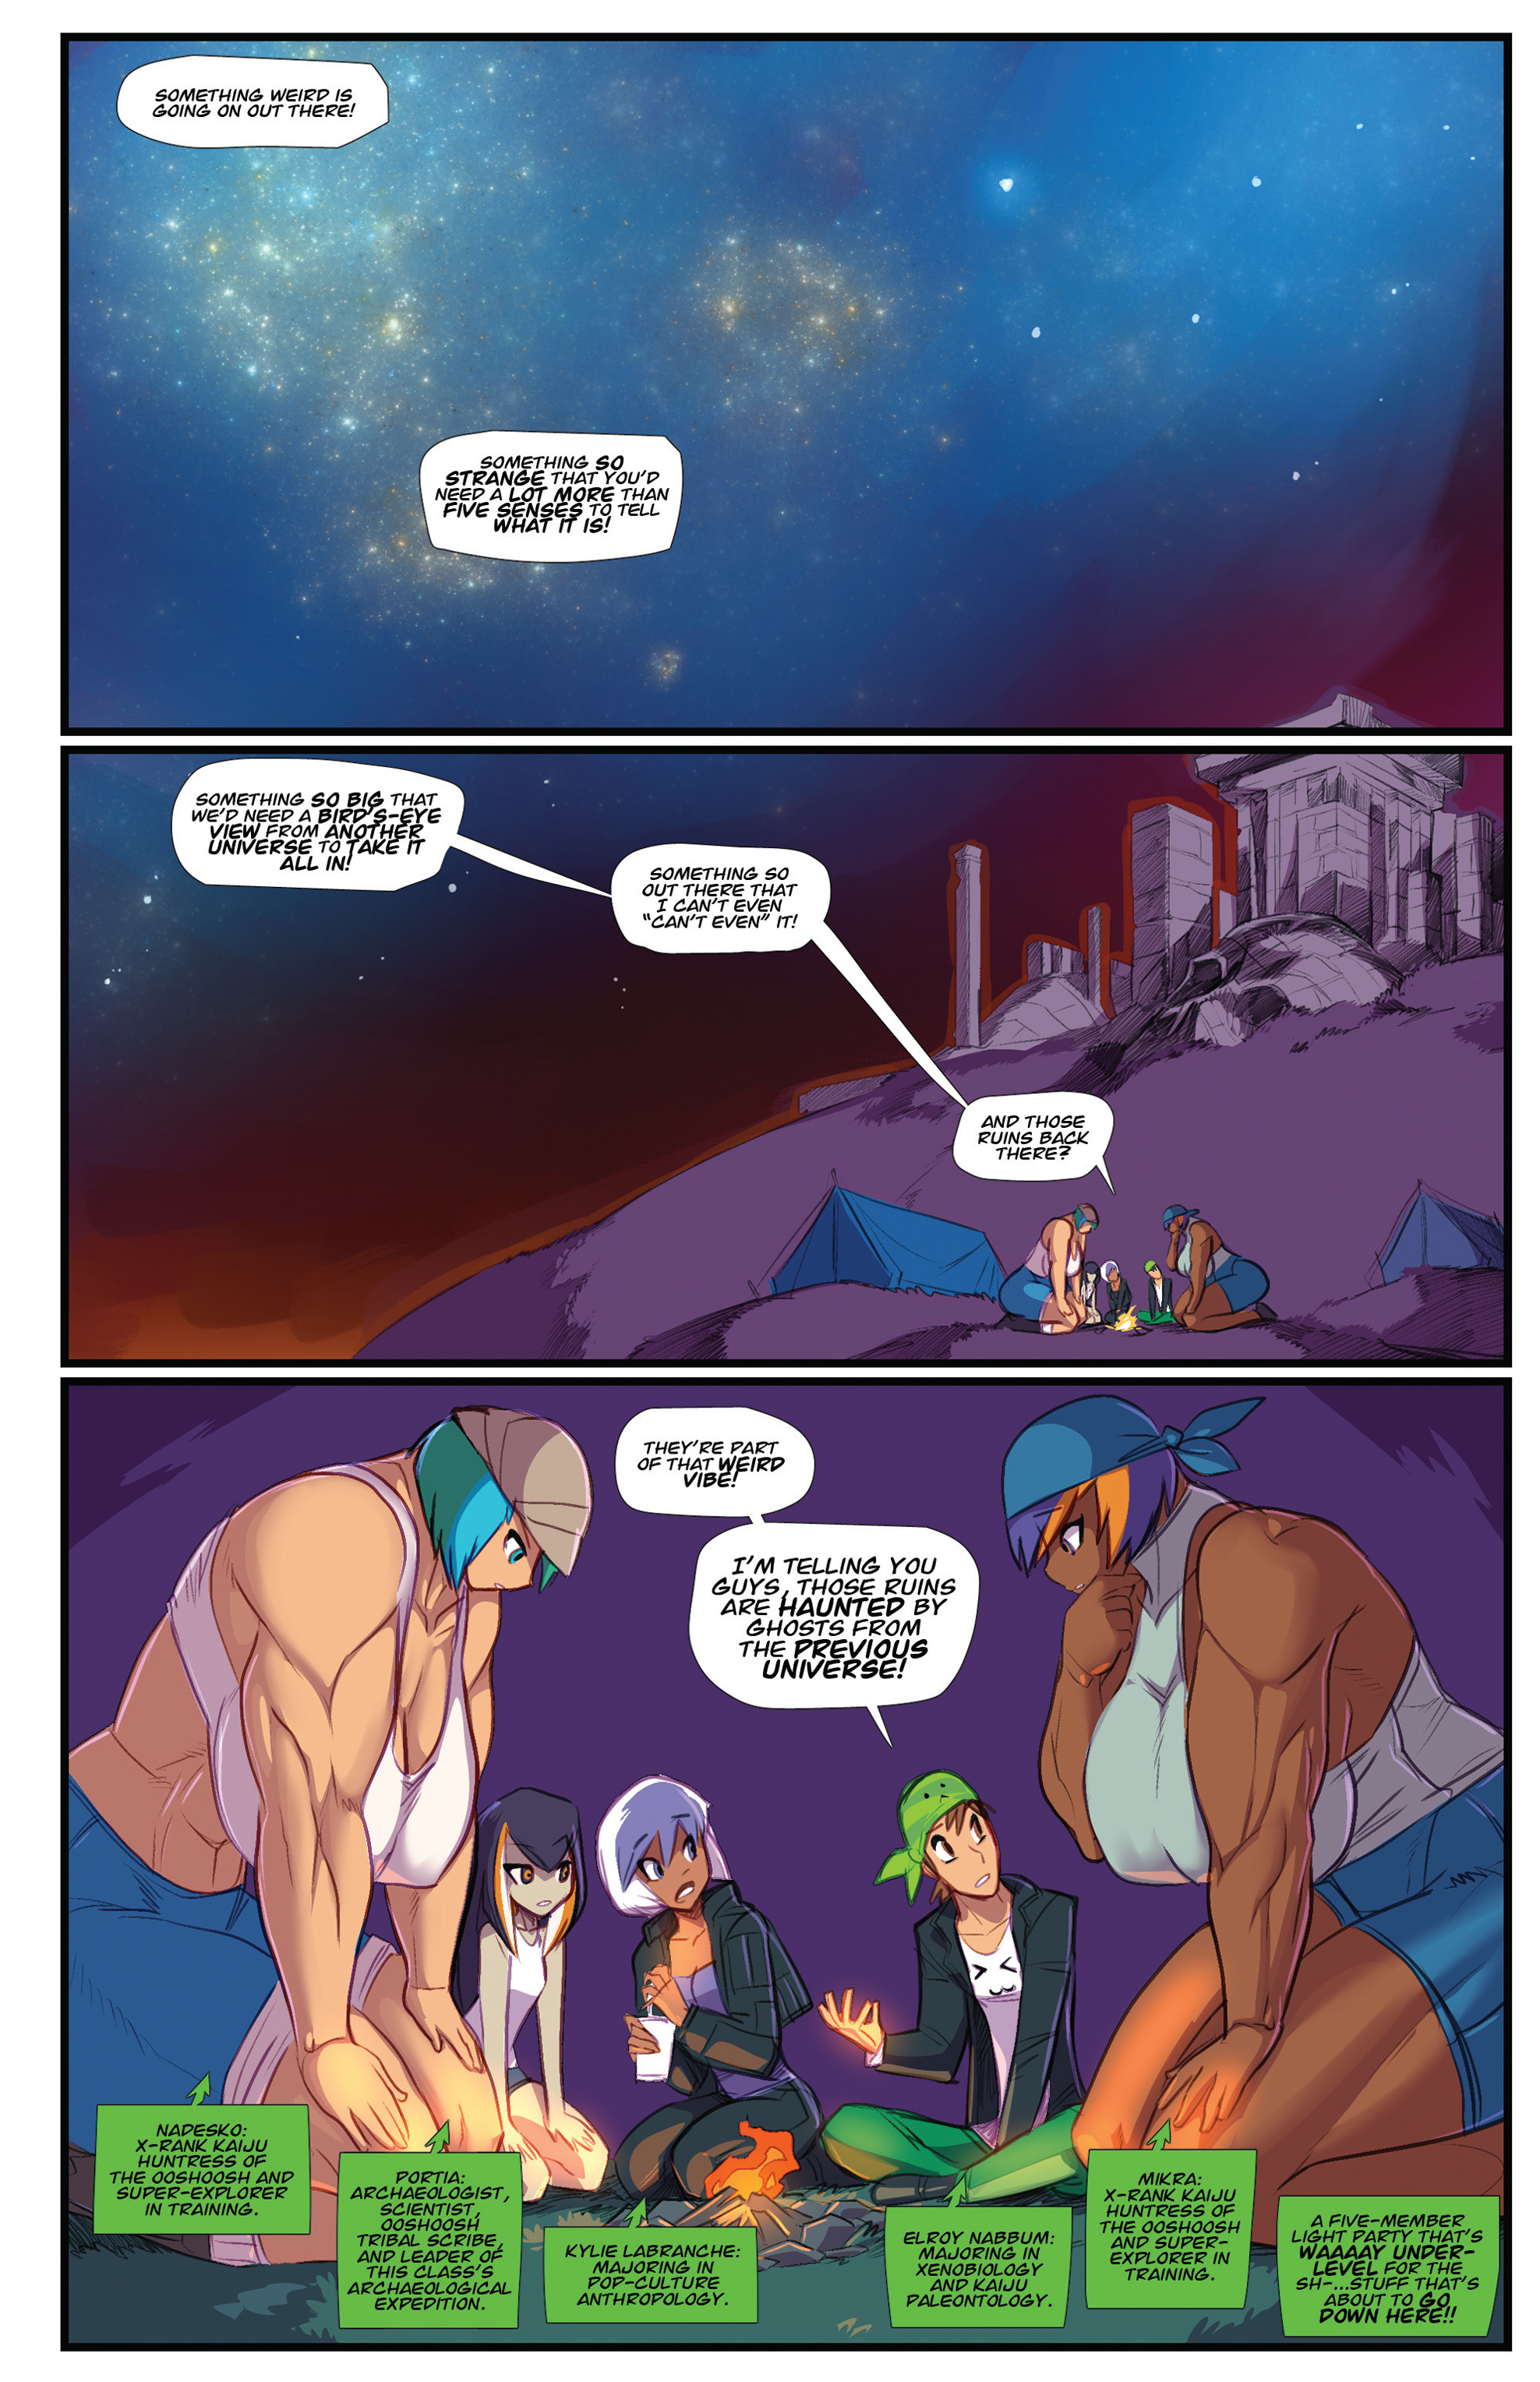 Gold Digger (1999-): Chapter 257 - Page 3